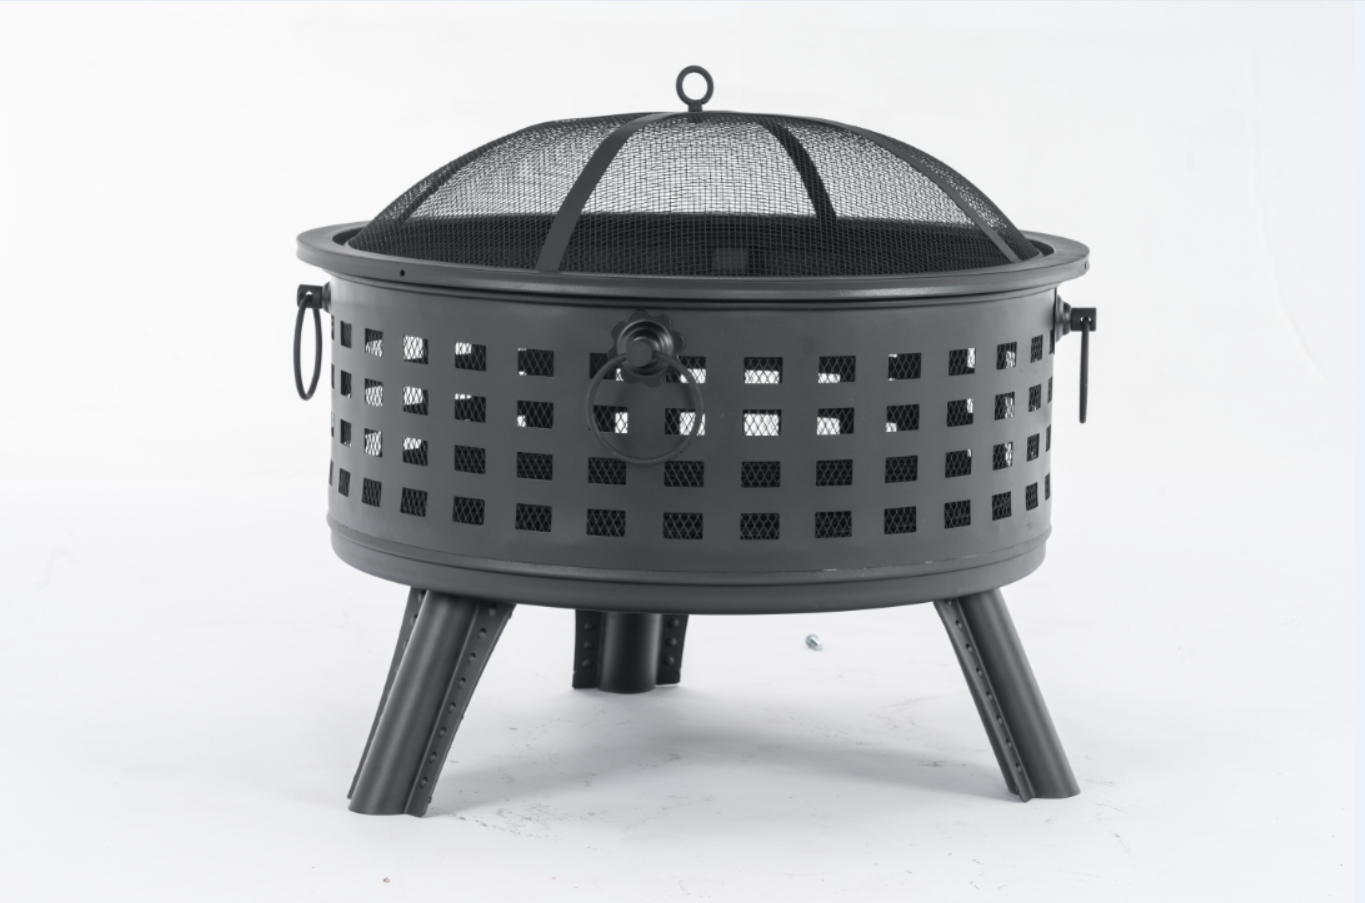 MCombo 26" Metal Black Fire Pit Round Table Backyard Patio Terrace Fire Bowl Heater/BBQ/Ice Pit with Charcoal Rack Waterproof Cover FT136BK